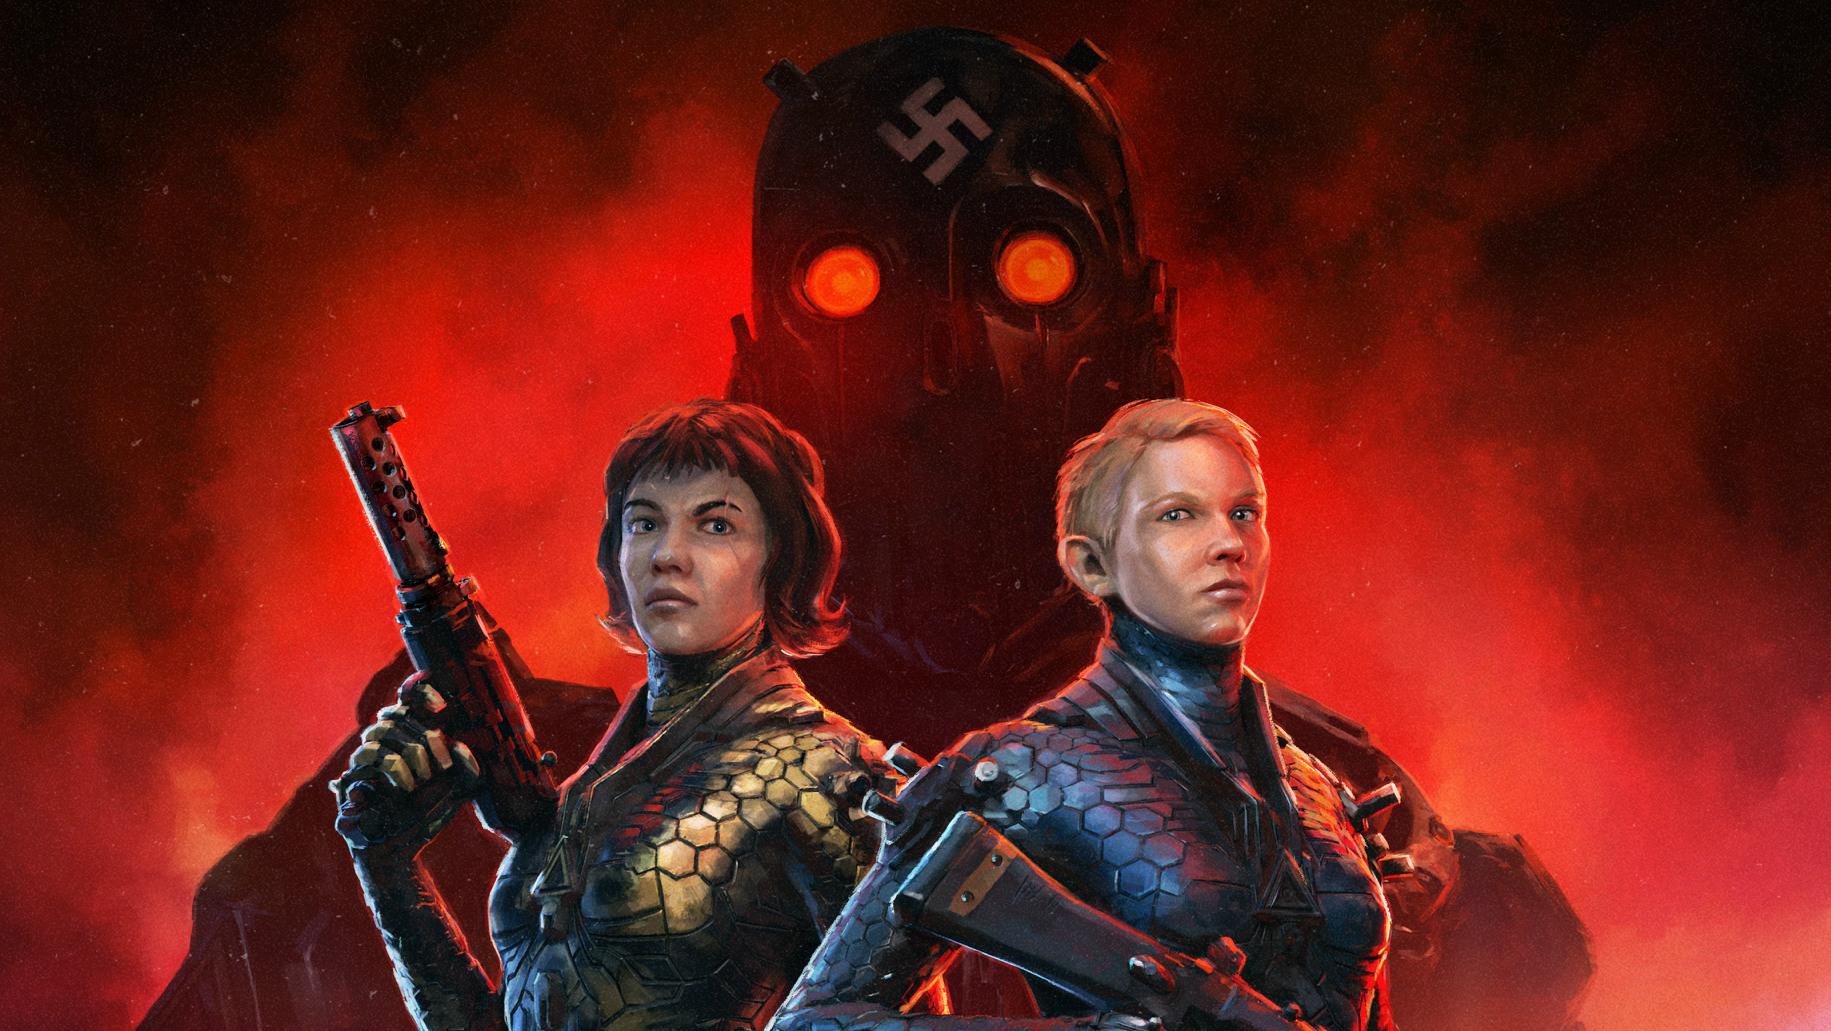 Wolfenstein Youngblood will feature open levels inspired